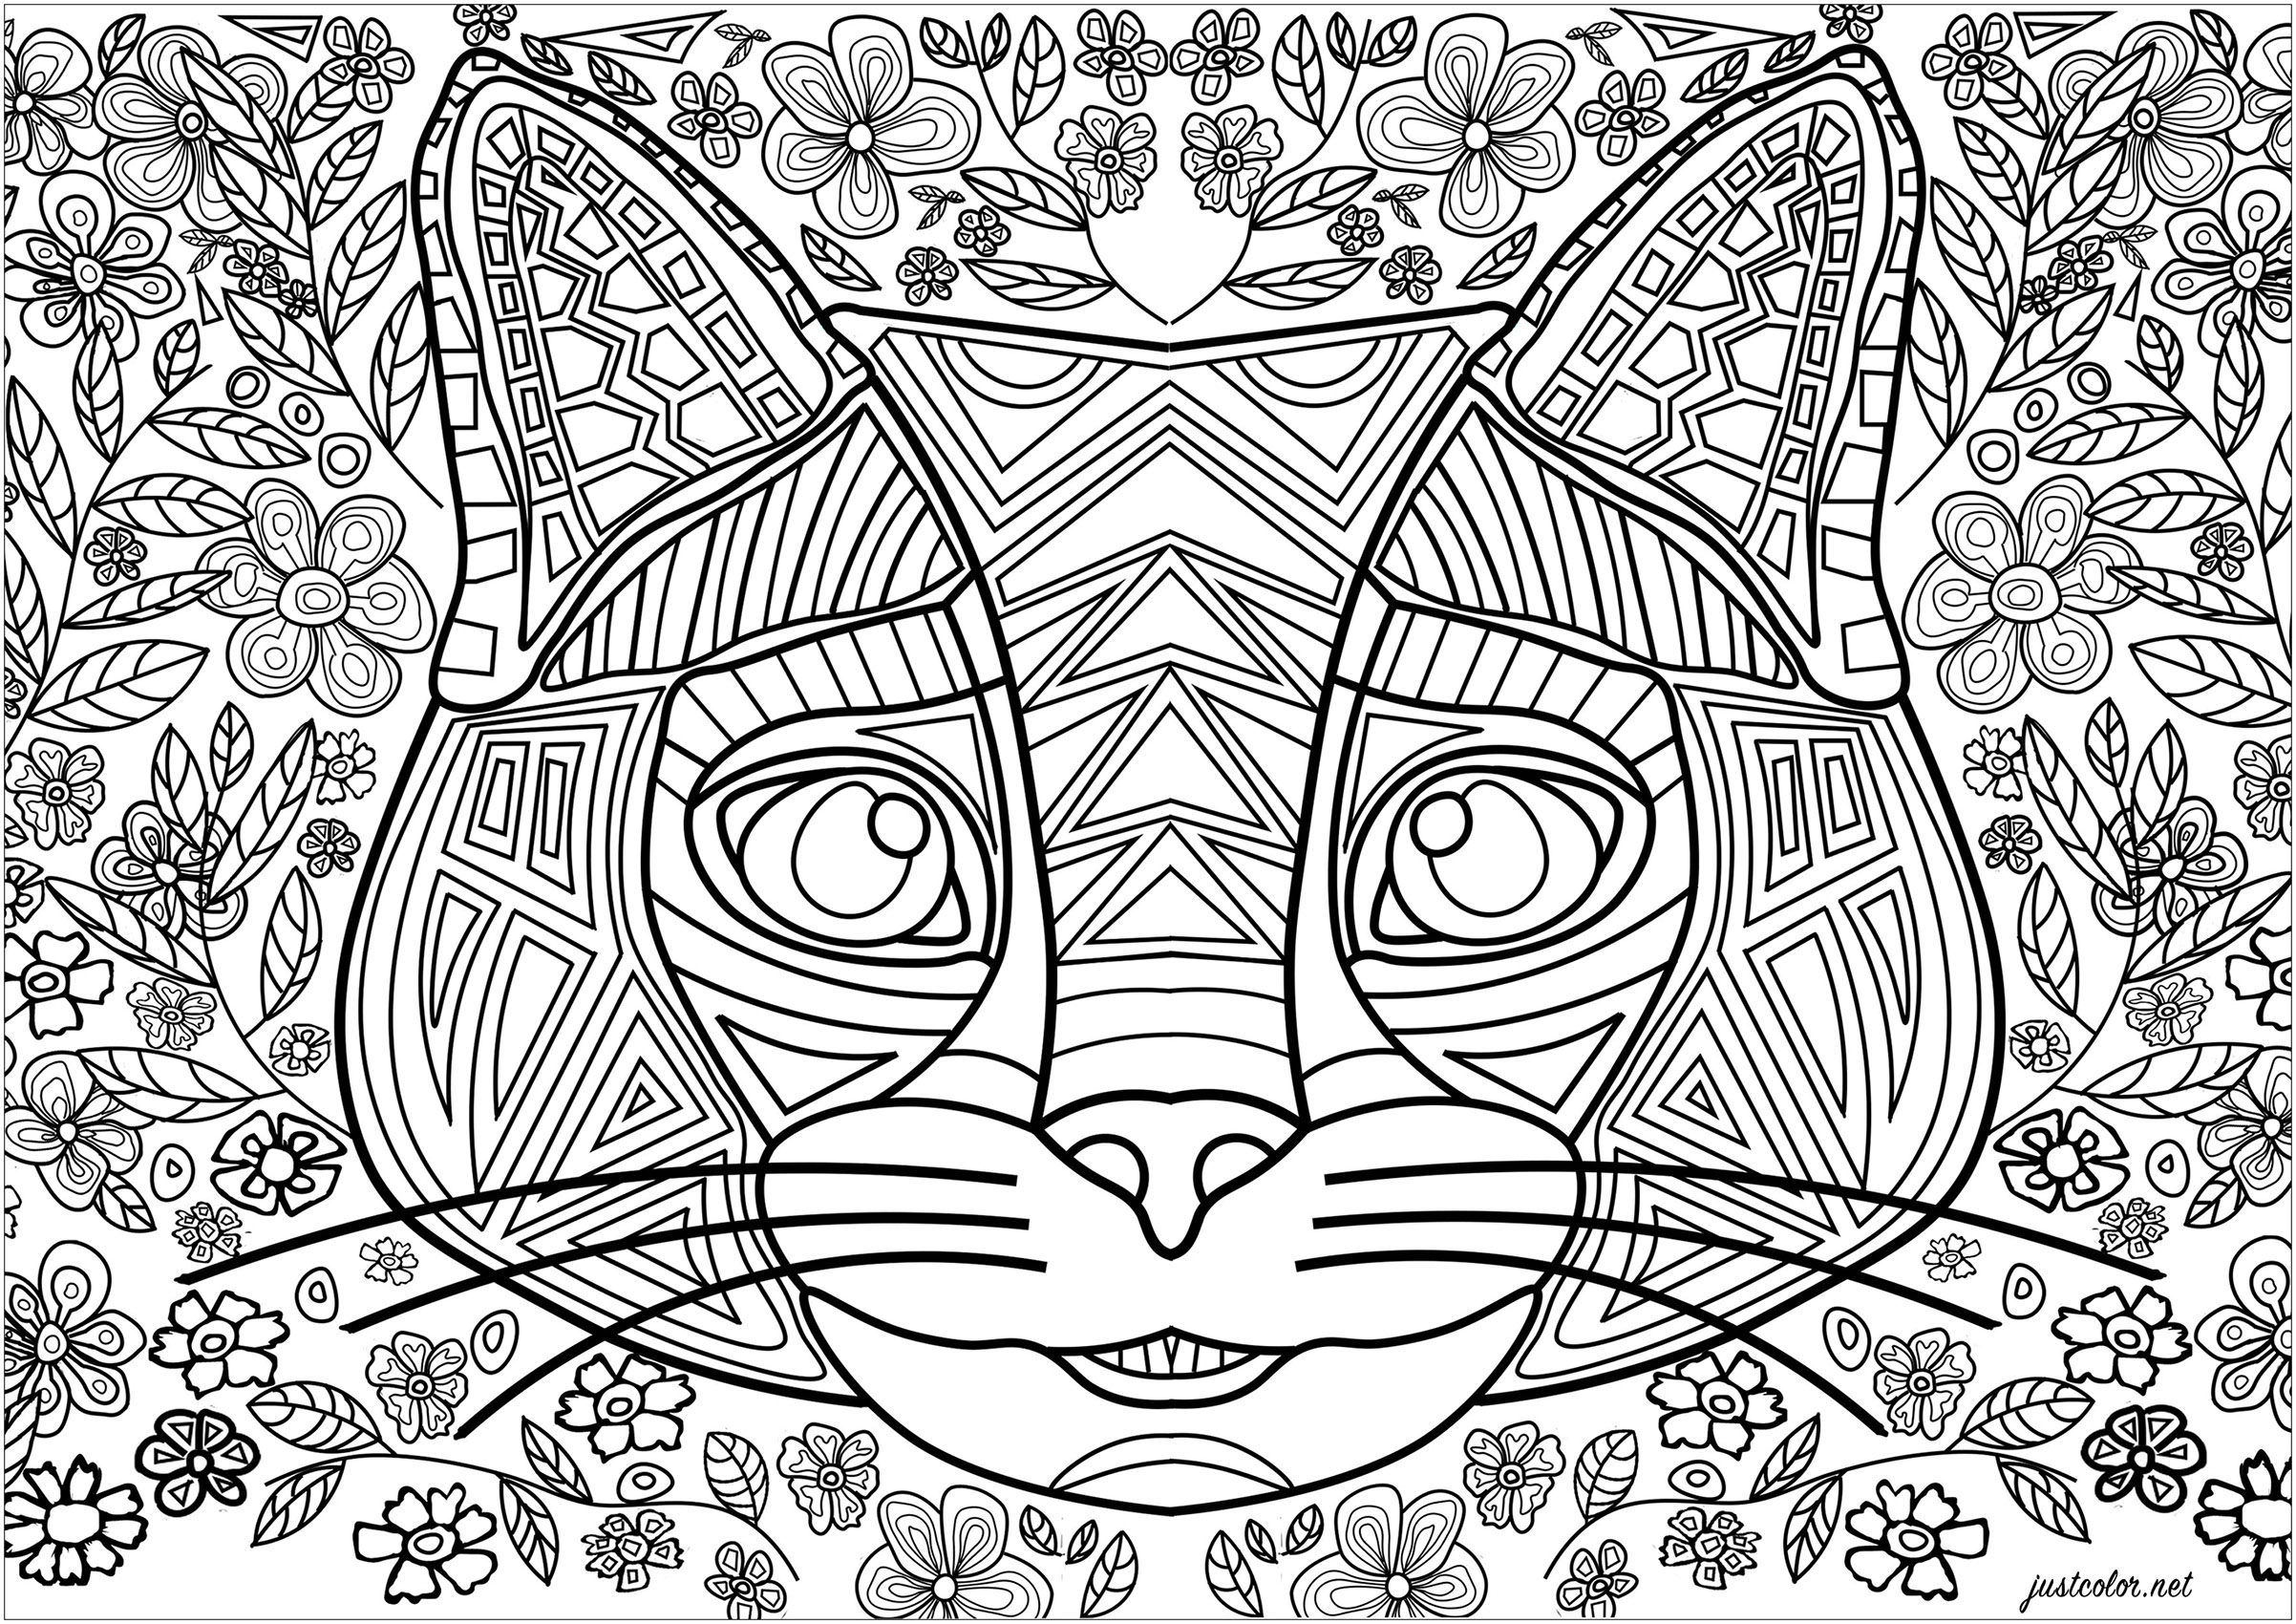 Cat head formed from regular lines and geometric shapes.